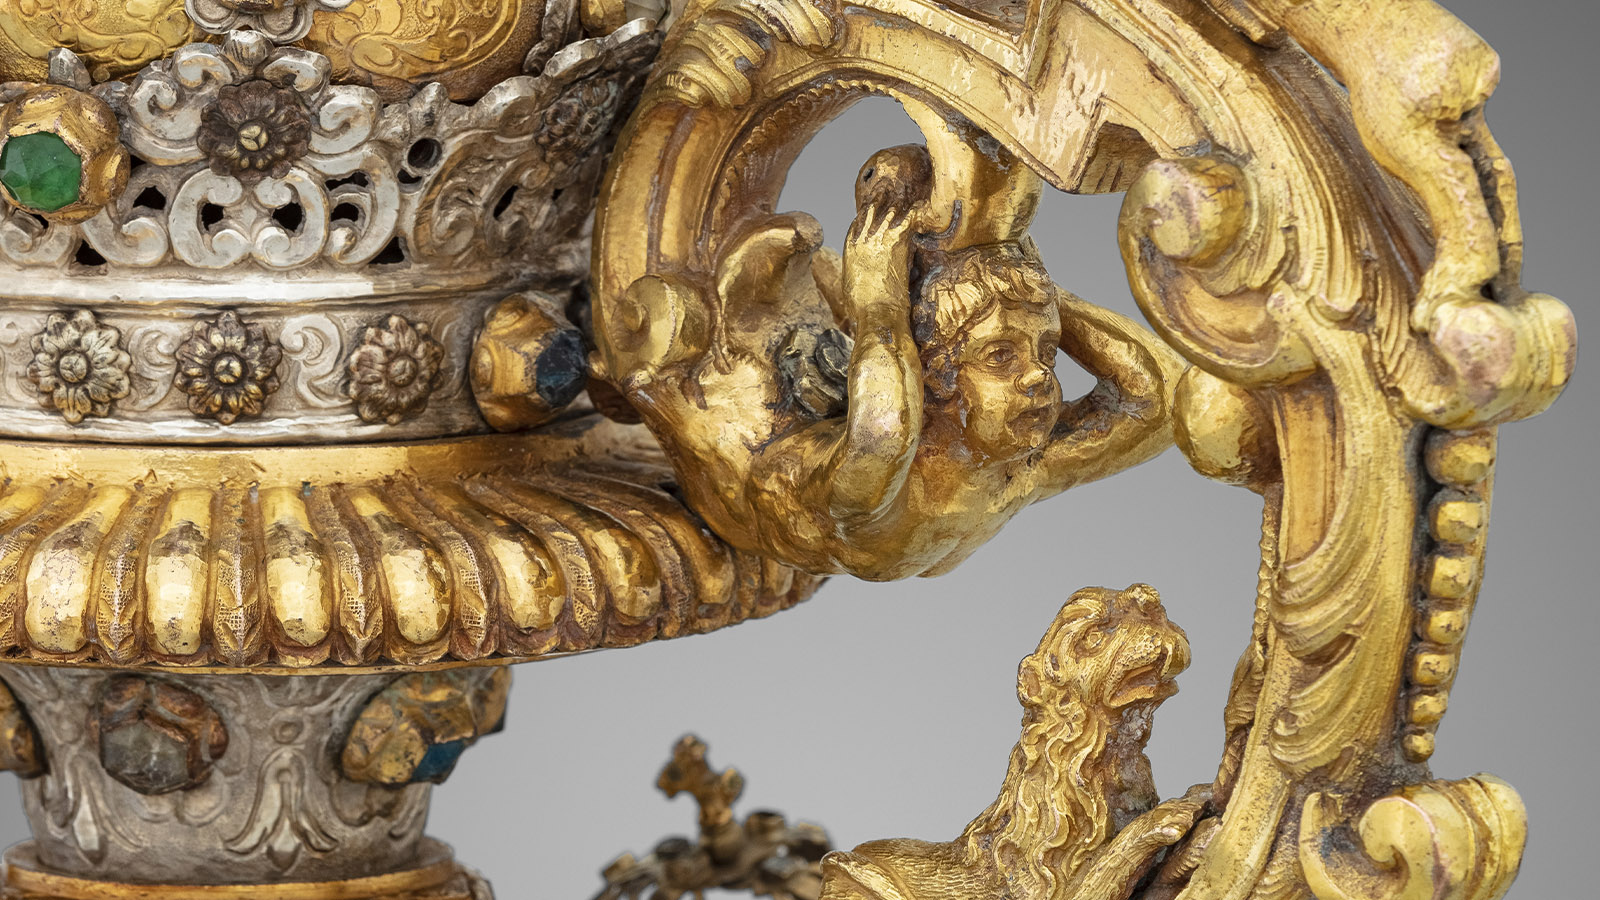 Set of six candlesticks and four altar bouquets [detail]. Pietro Juvarra (attrib.). Messina, Italy, 17th century. Silver, gilt copper and gemstones. Custody of the Holy Land, Jerusalem.